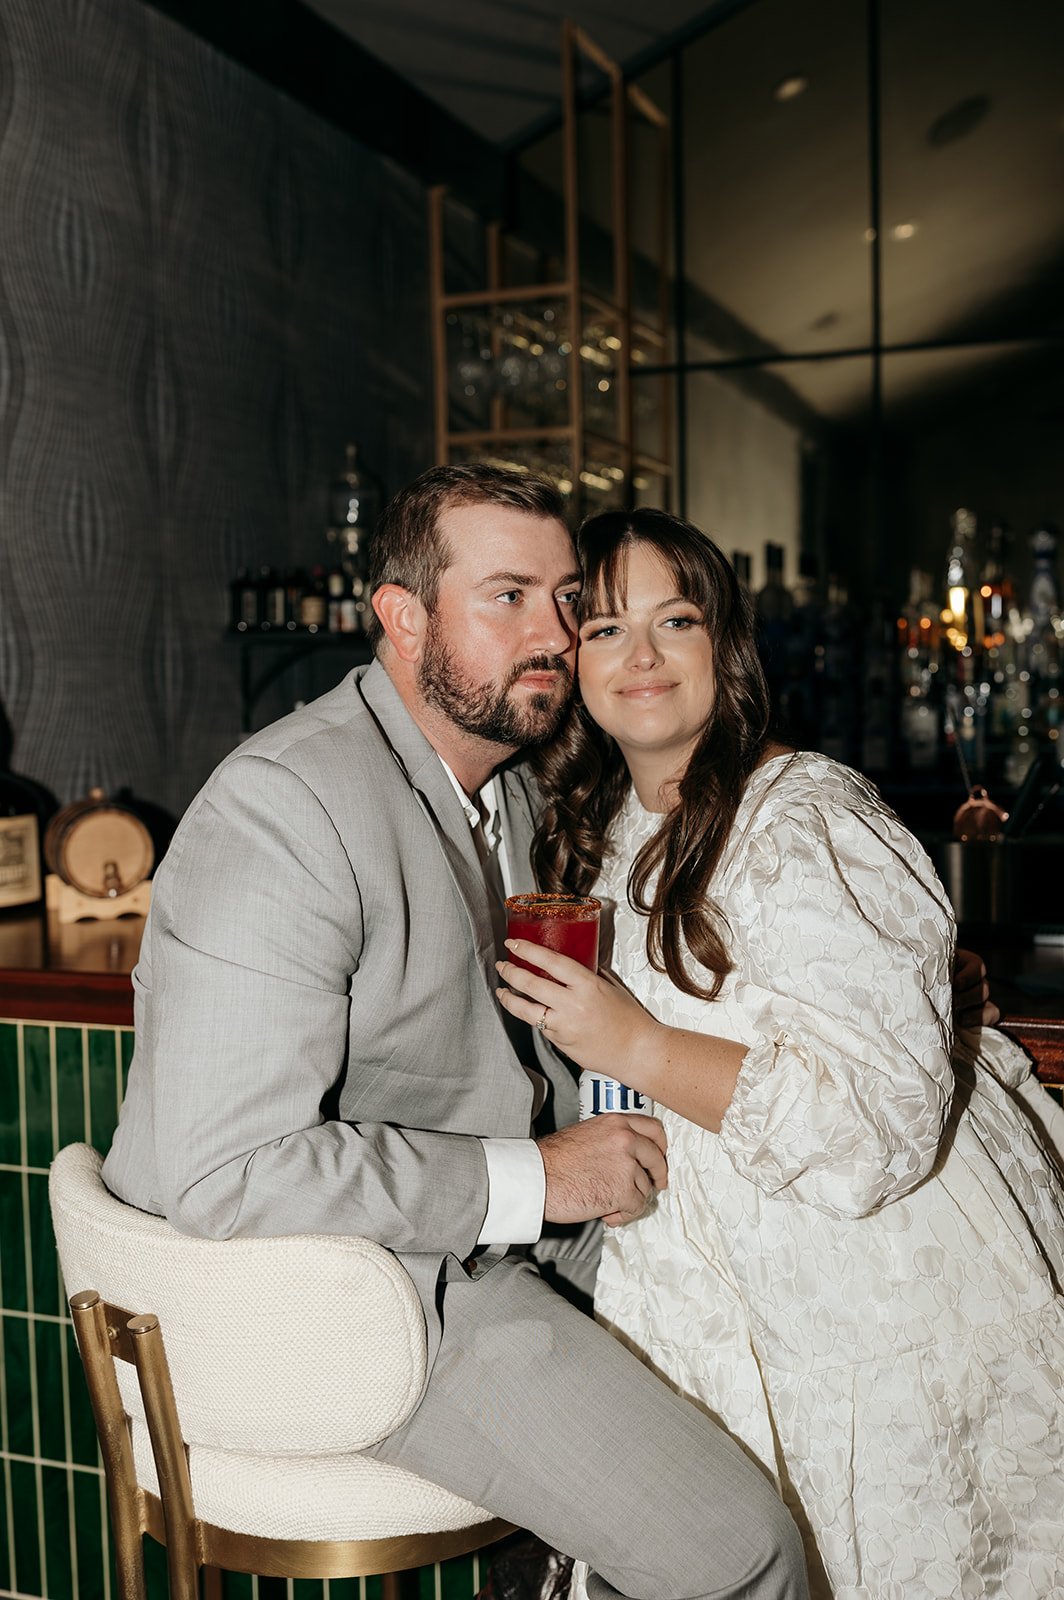 The couple switched up their more rugged outfits for cocktail hour engagement photos